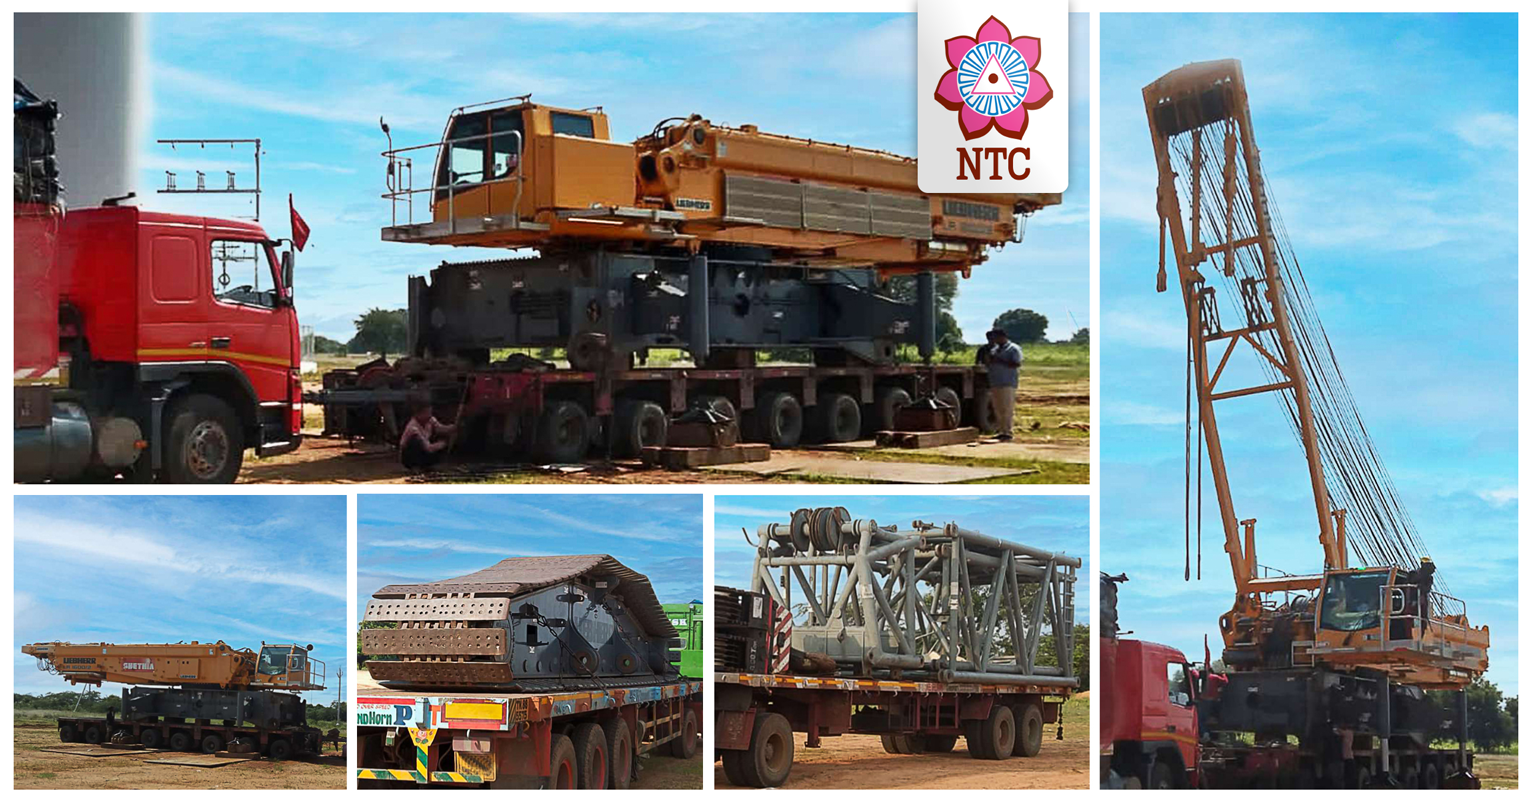 NTC Logistics Used 28 Different Types of Vehicles to Deliver 86 Packages of Crane Parts from Tamil Nadu to Karnataka